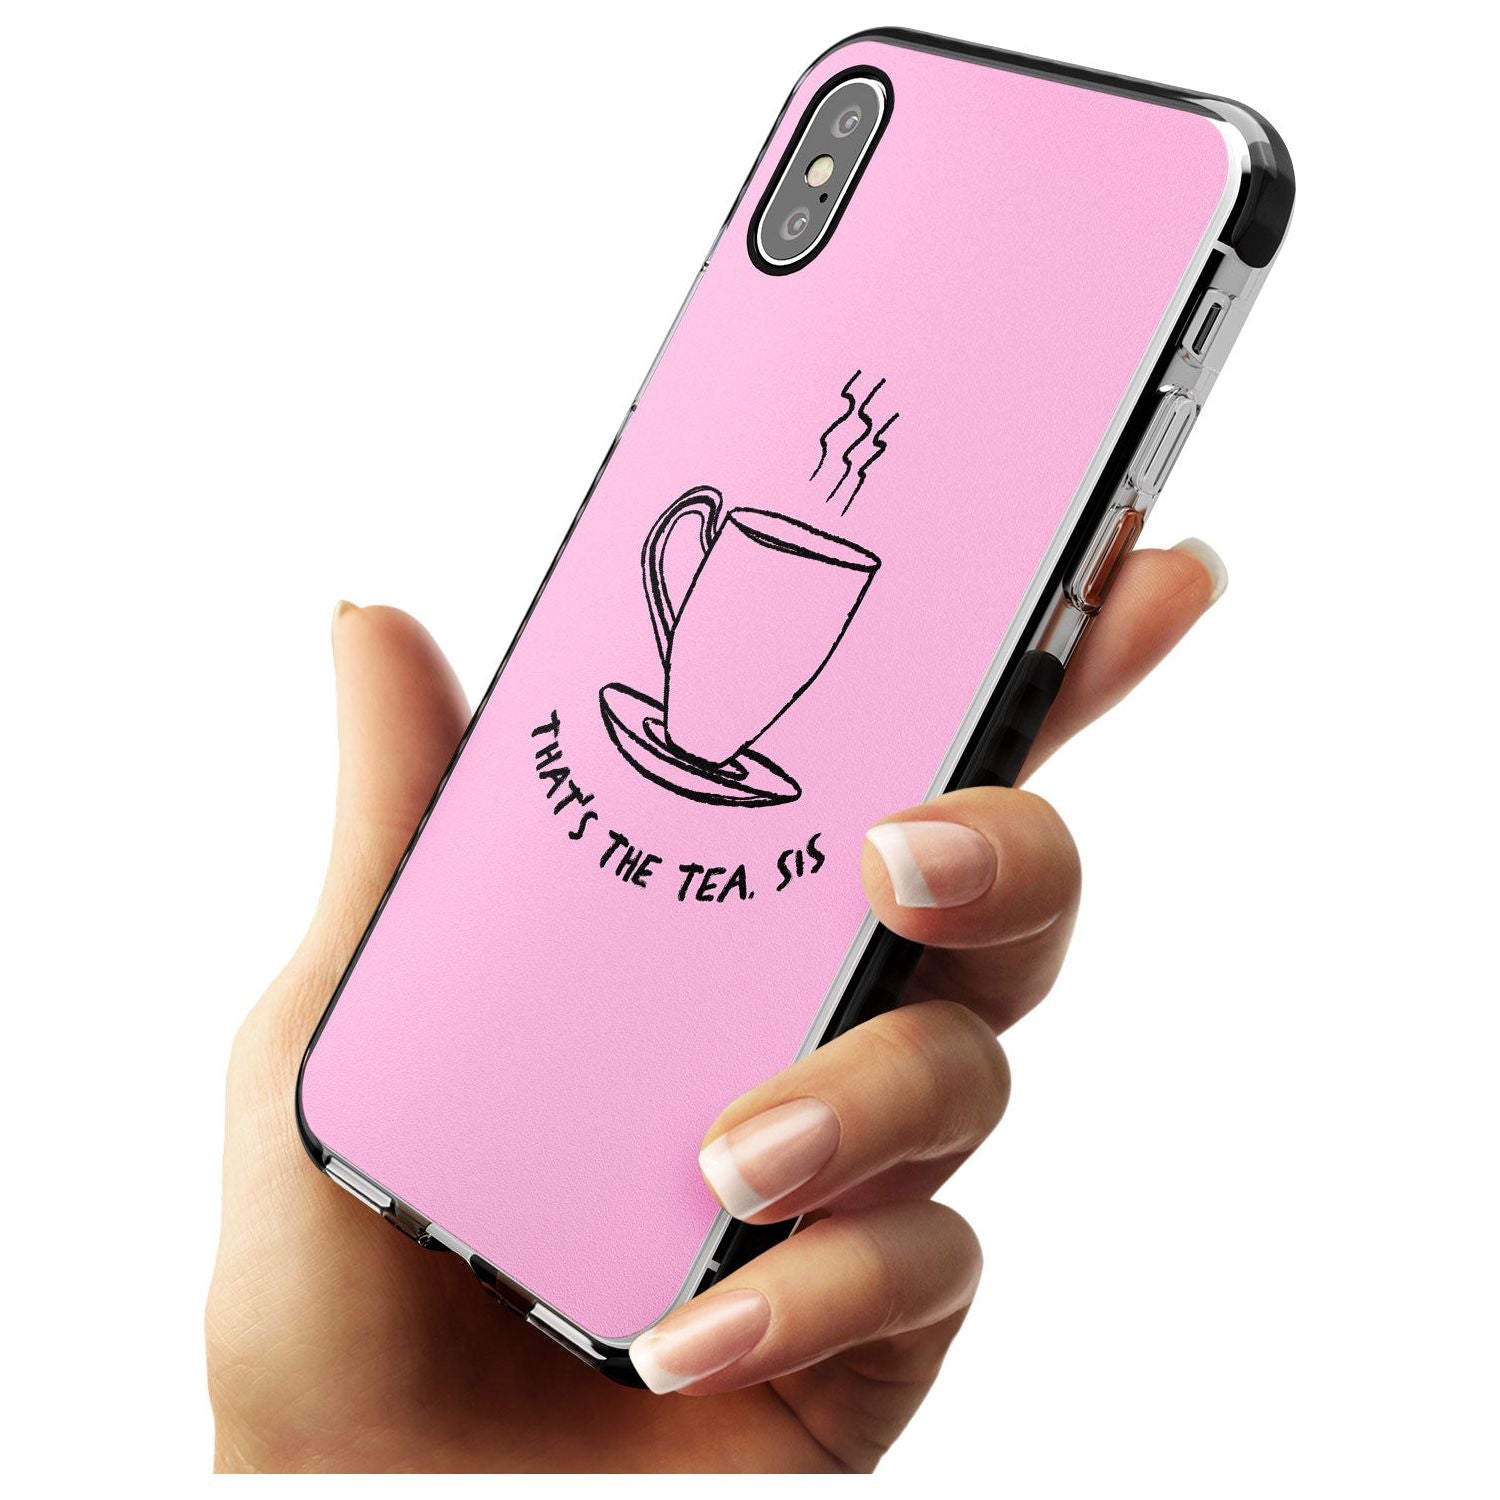 That's the Tea, Sis Pink Black Impact Phone Case for iPhone X XS Max XR